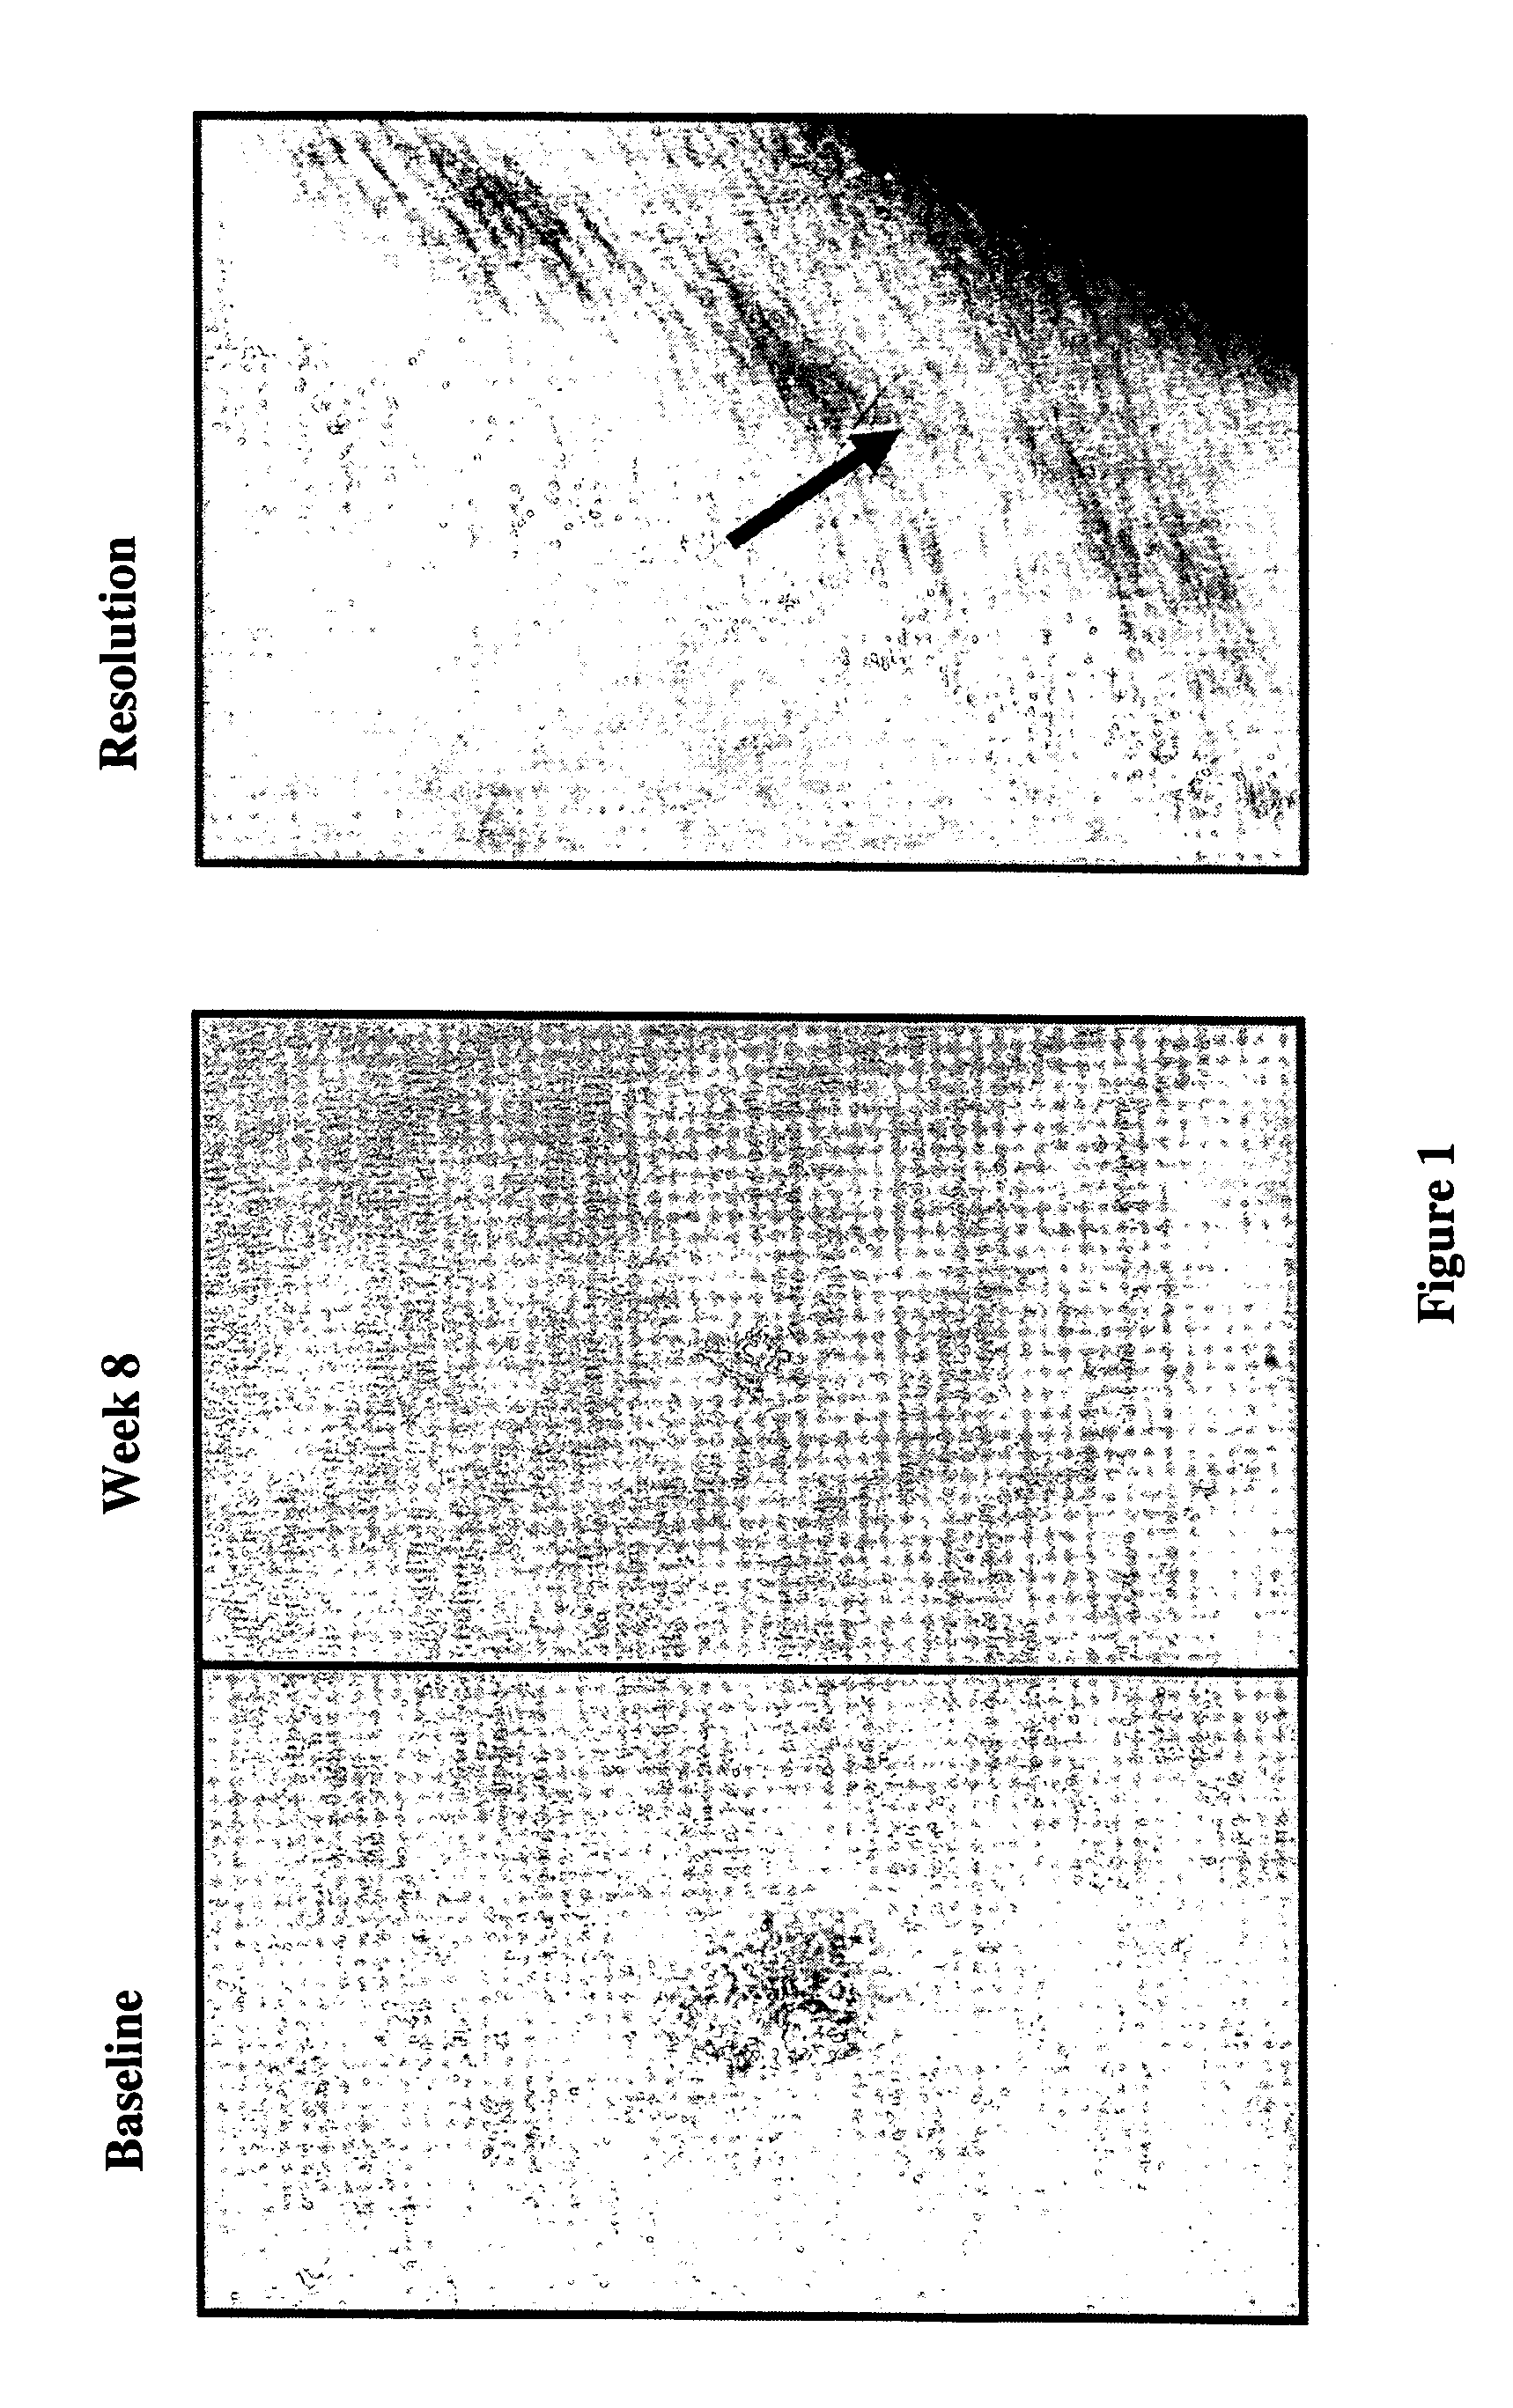 Methods of using and compositions comprising immunomodulatory compounds for the treatment and management of skin diseases or disorders